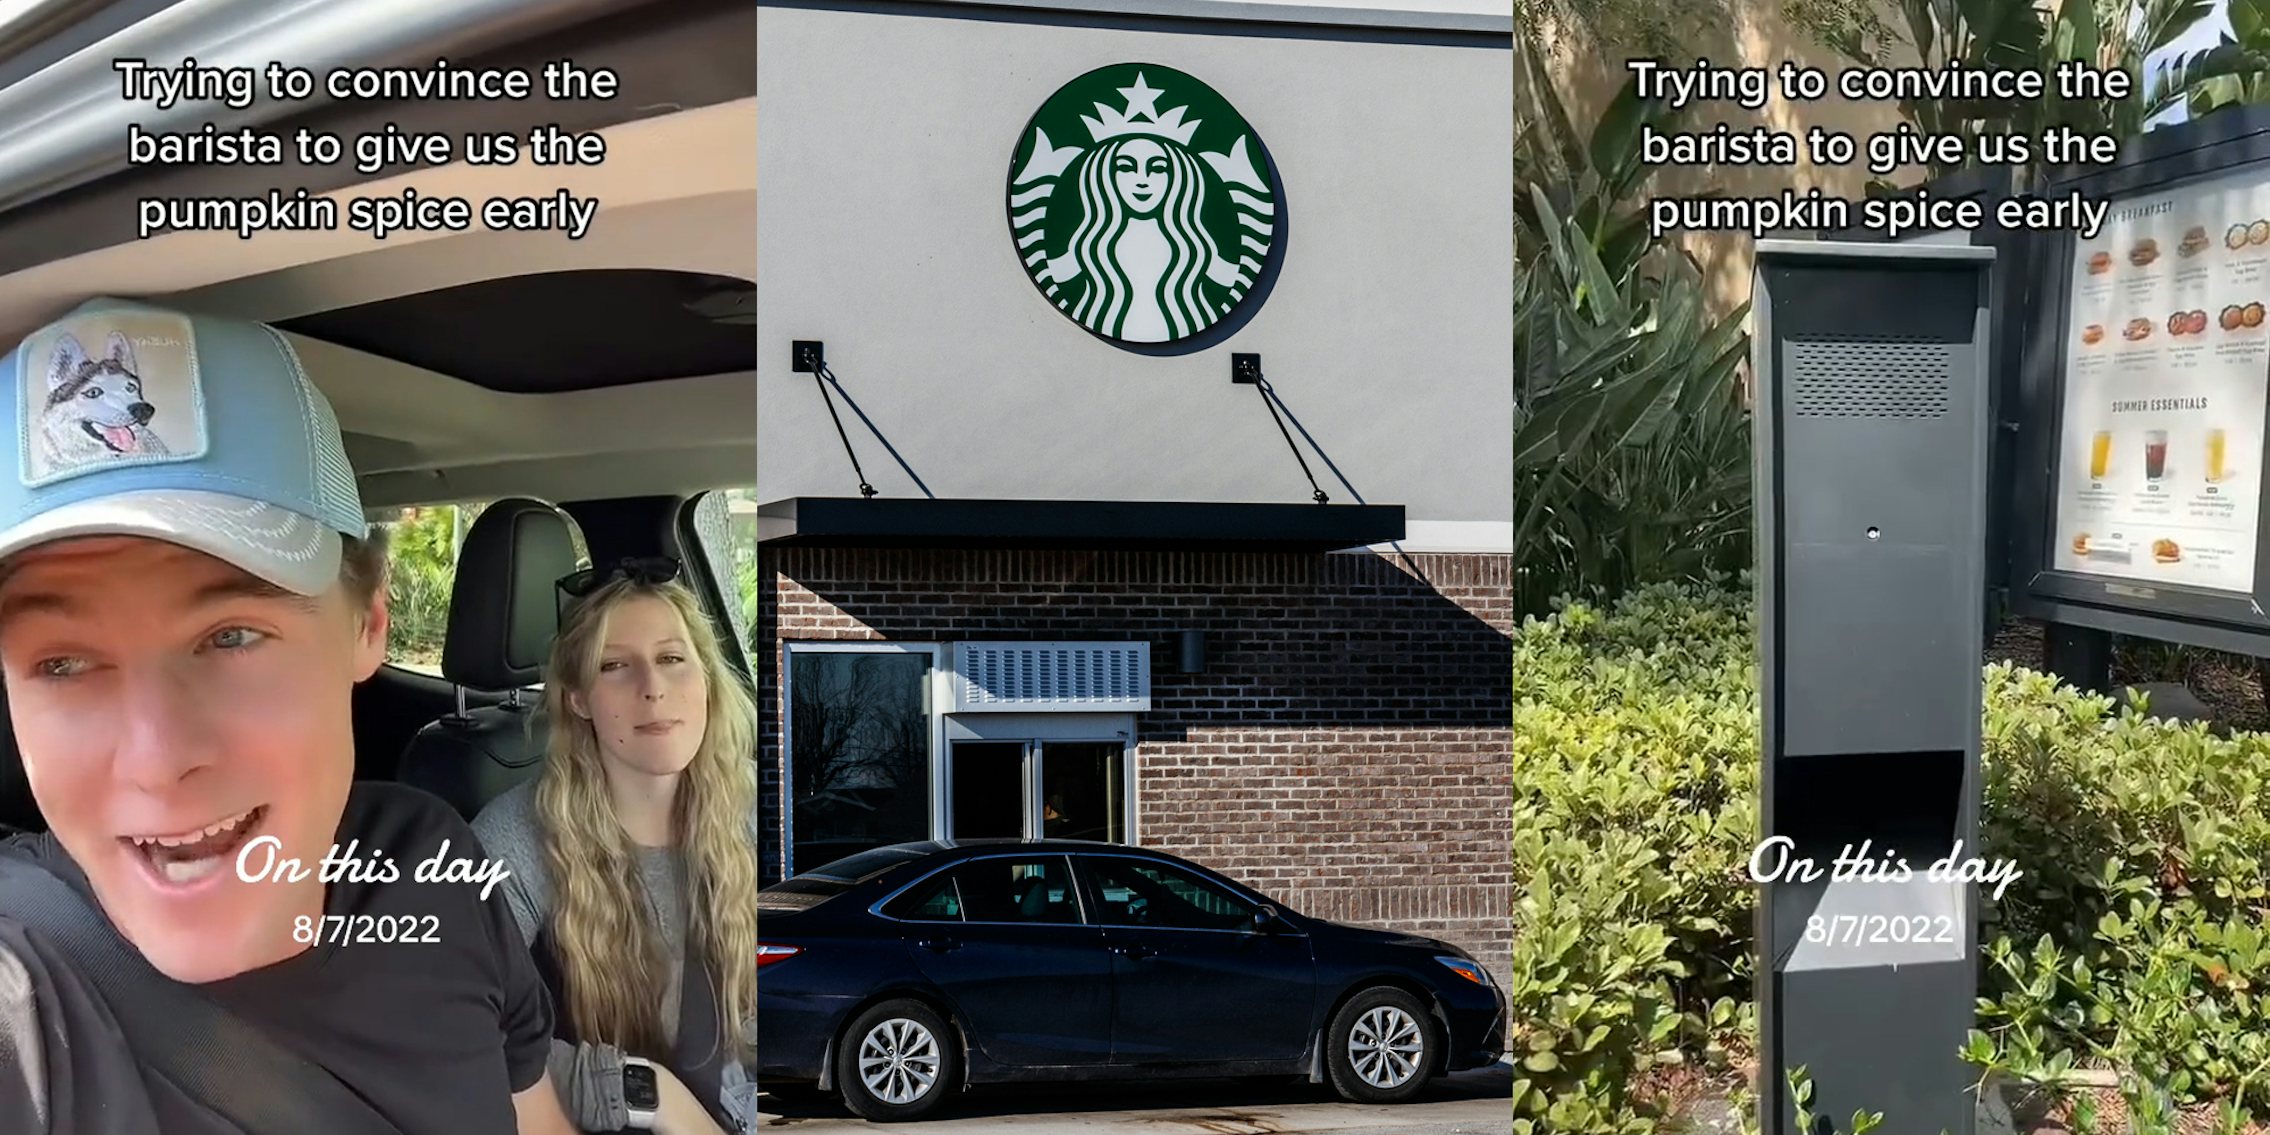 customers in truck at Starbucks drive thru speaker with caption 'Trying to convince the barista to give us the pumpkin spice early' (l) Starbucks drive thru with sign (c) Starbucks drive thru speaker with caption 'Trying to convince the barista to give us the pumpkin spice early' (r)